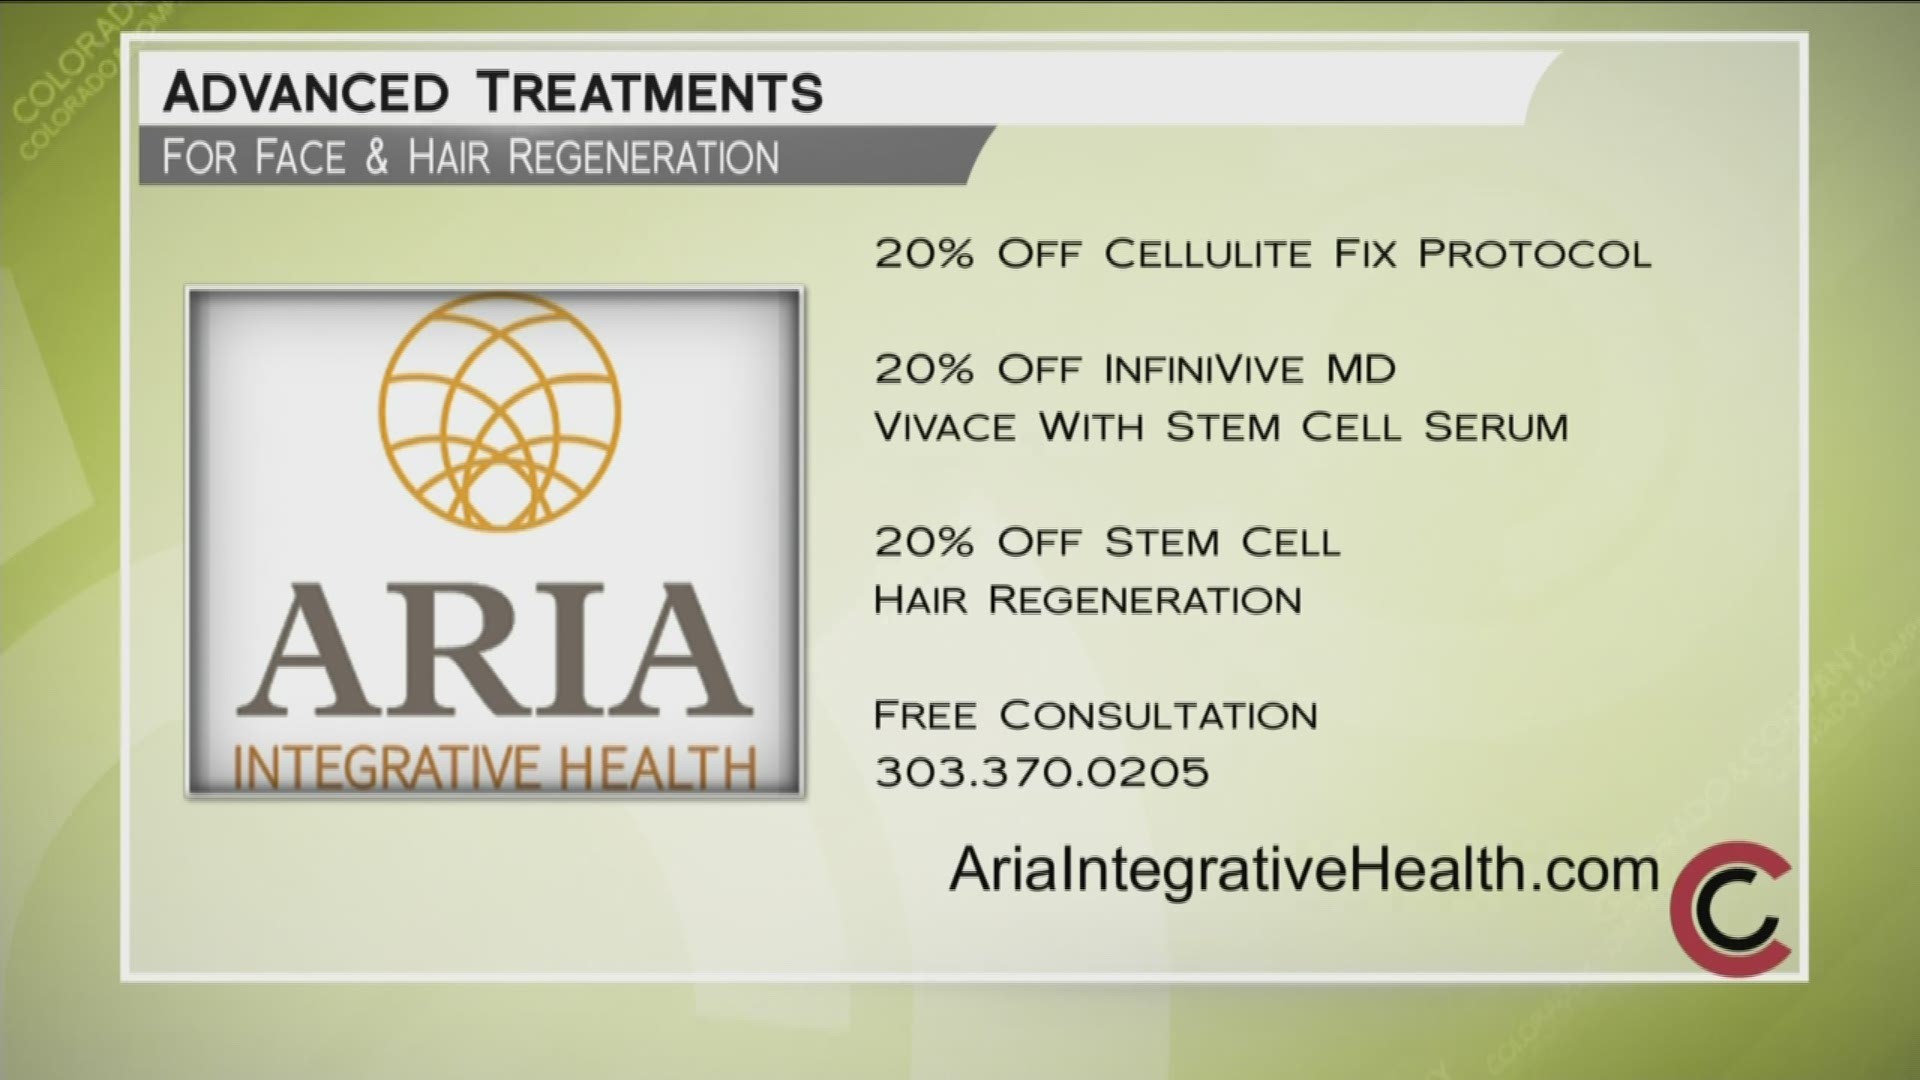 Aria Integrative Health has the treatments that can fit your lifestyle. Learn what they can do for you at AriaIntegrativeHealth.com or call 303.370.0205.